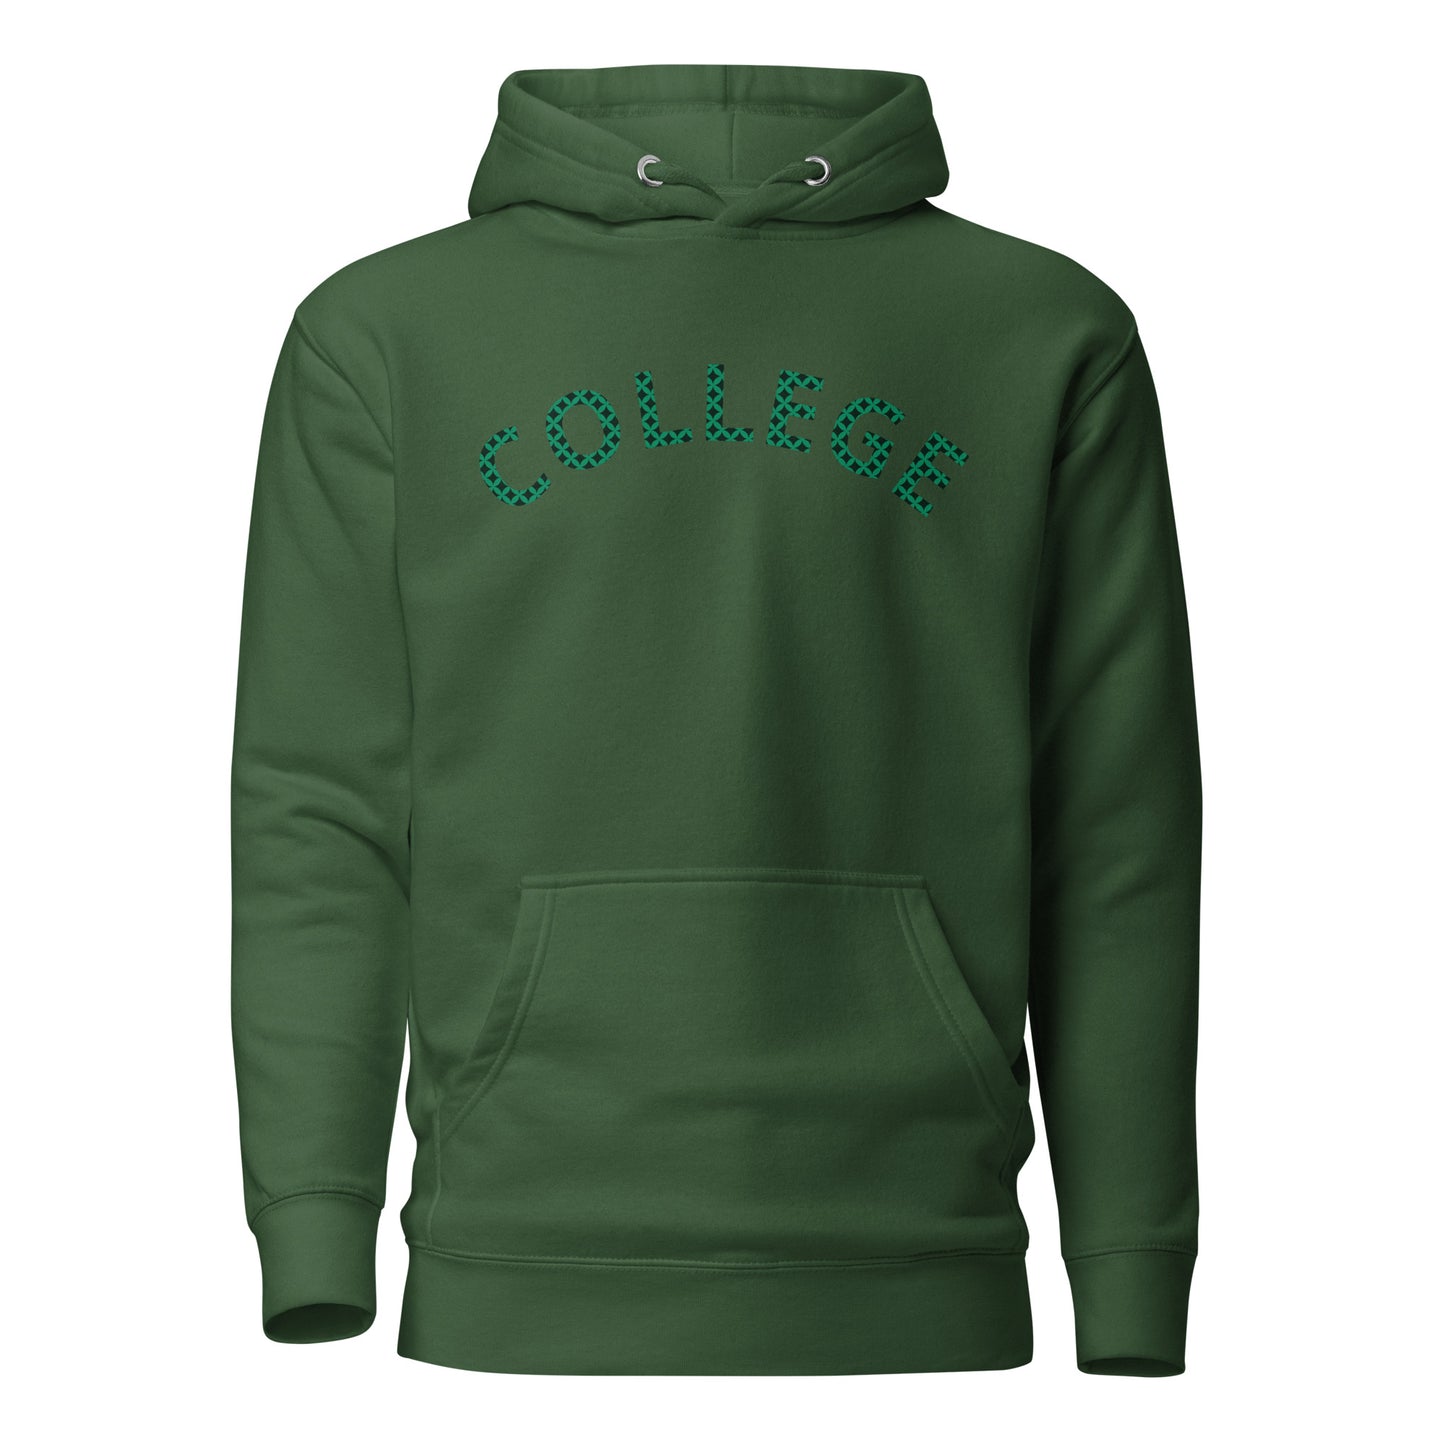 Mens Forest Green Hoodie that says 'College'  in green